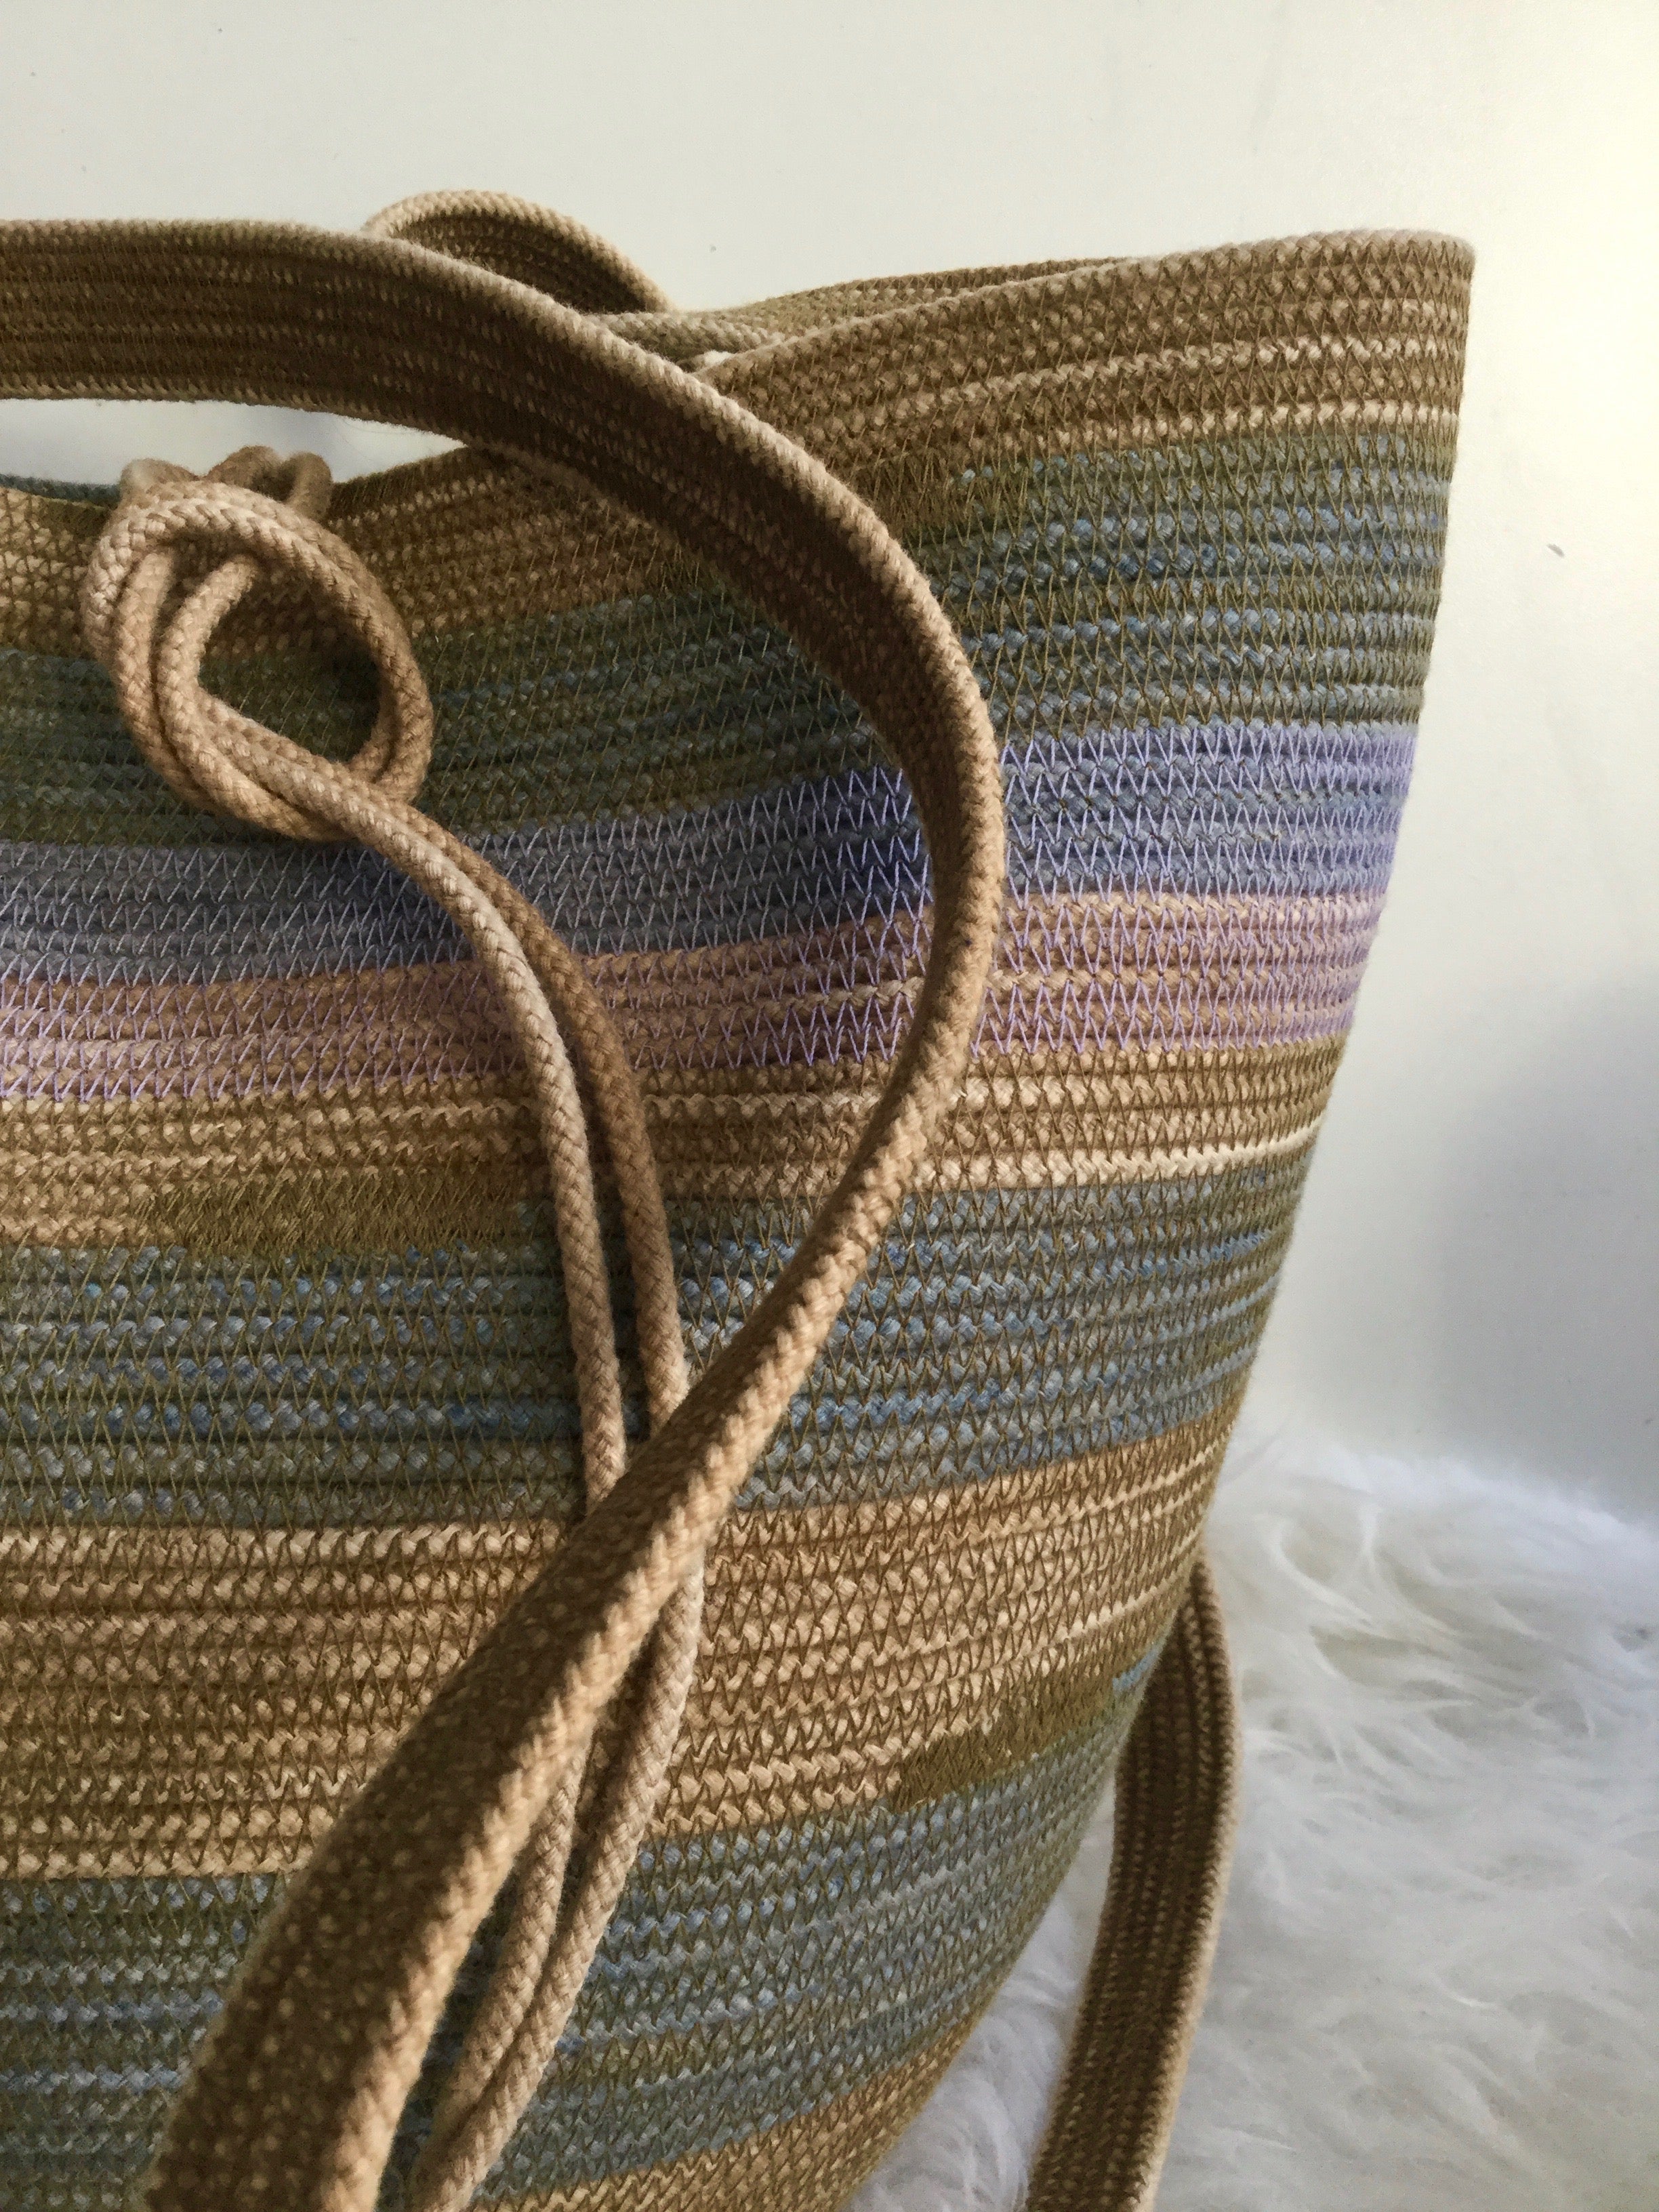 foraging basket made from cotton rope